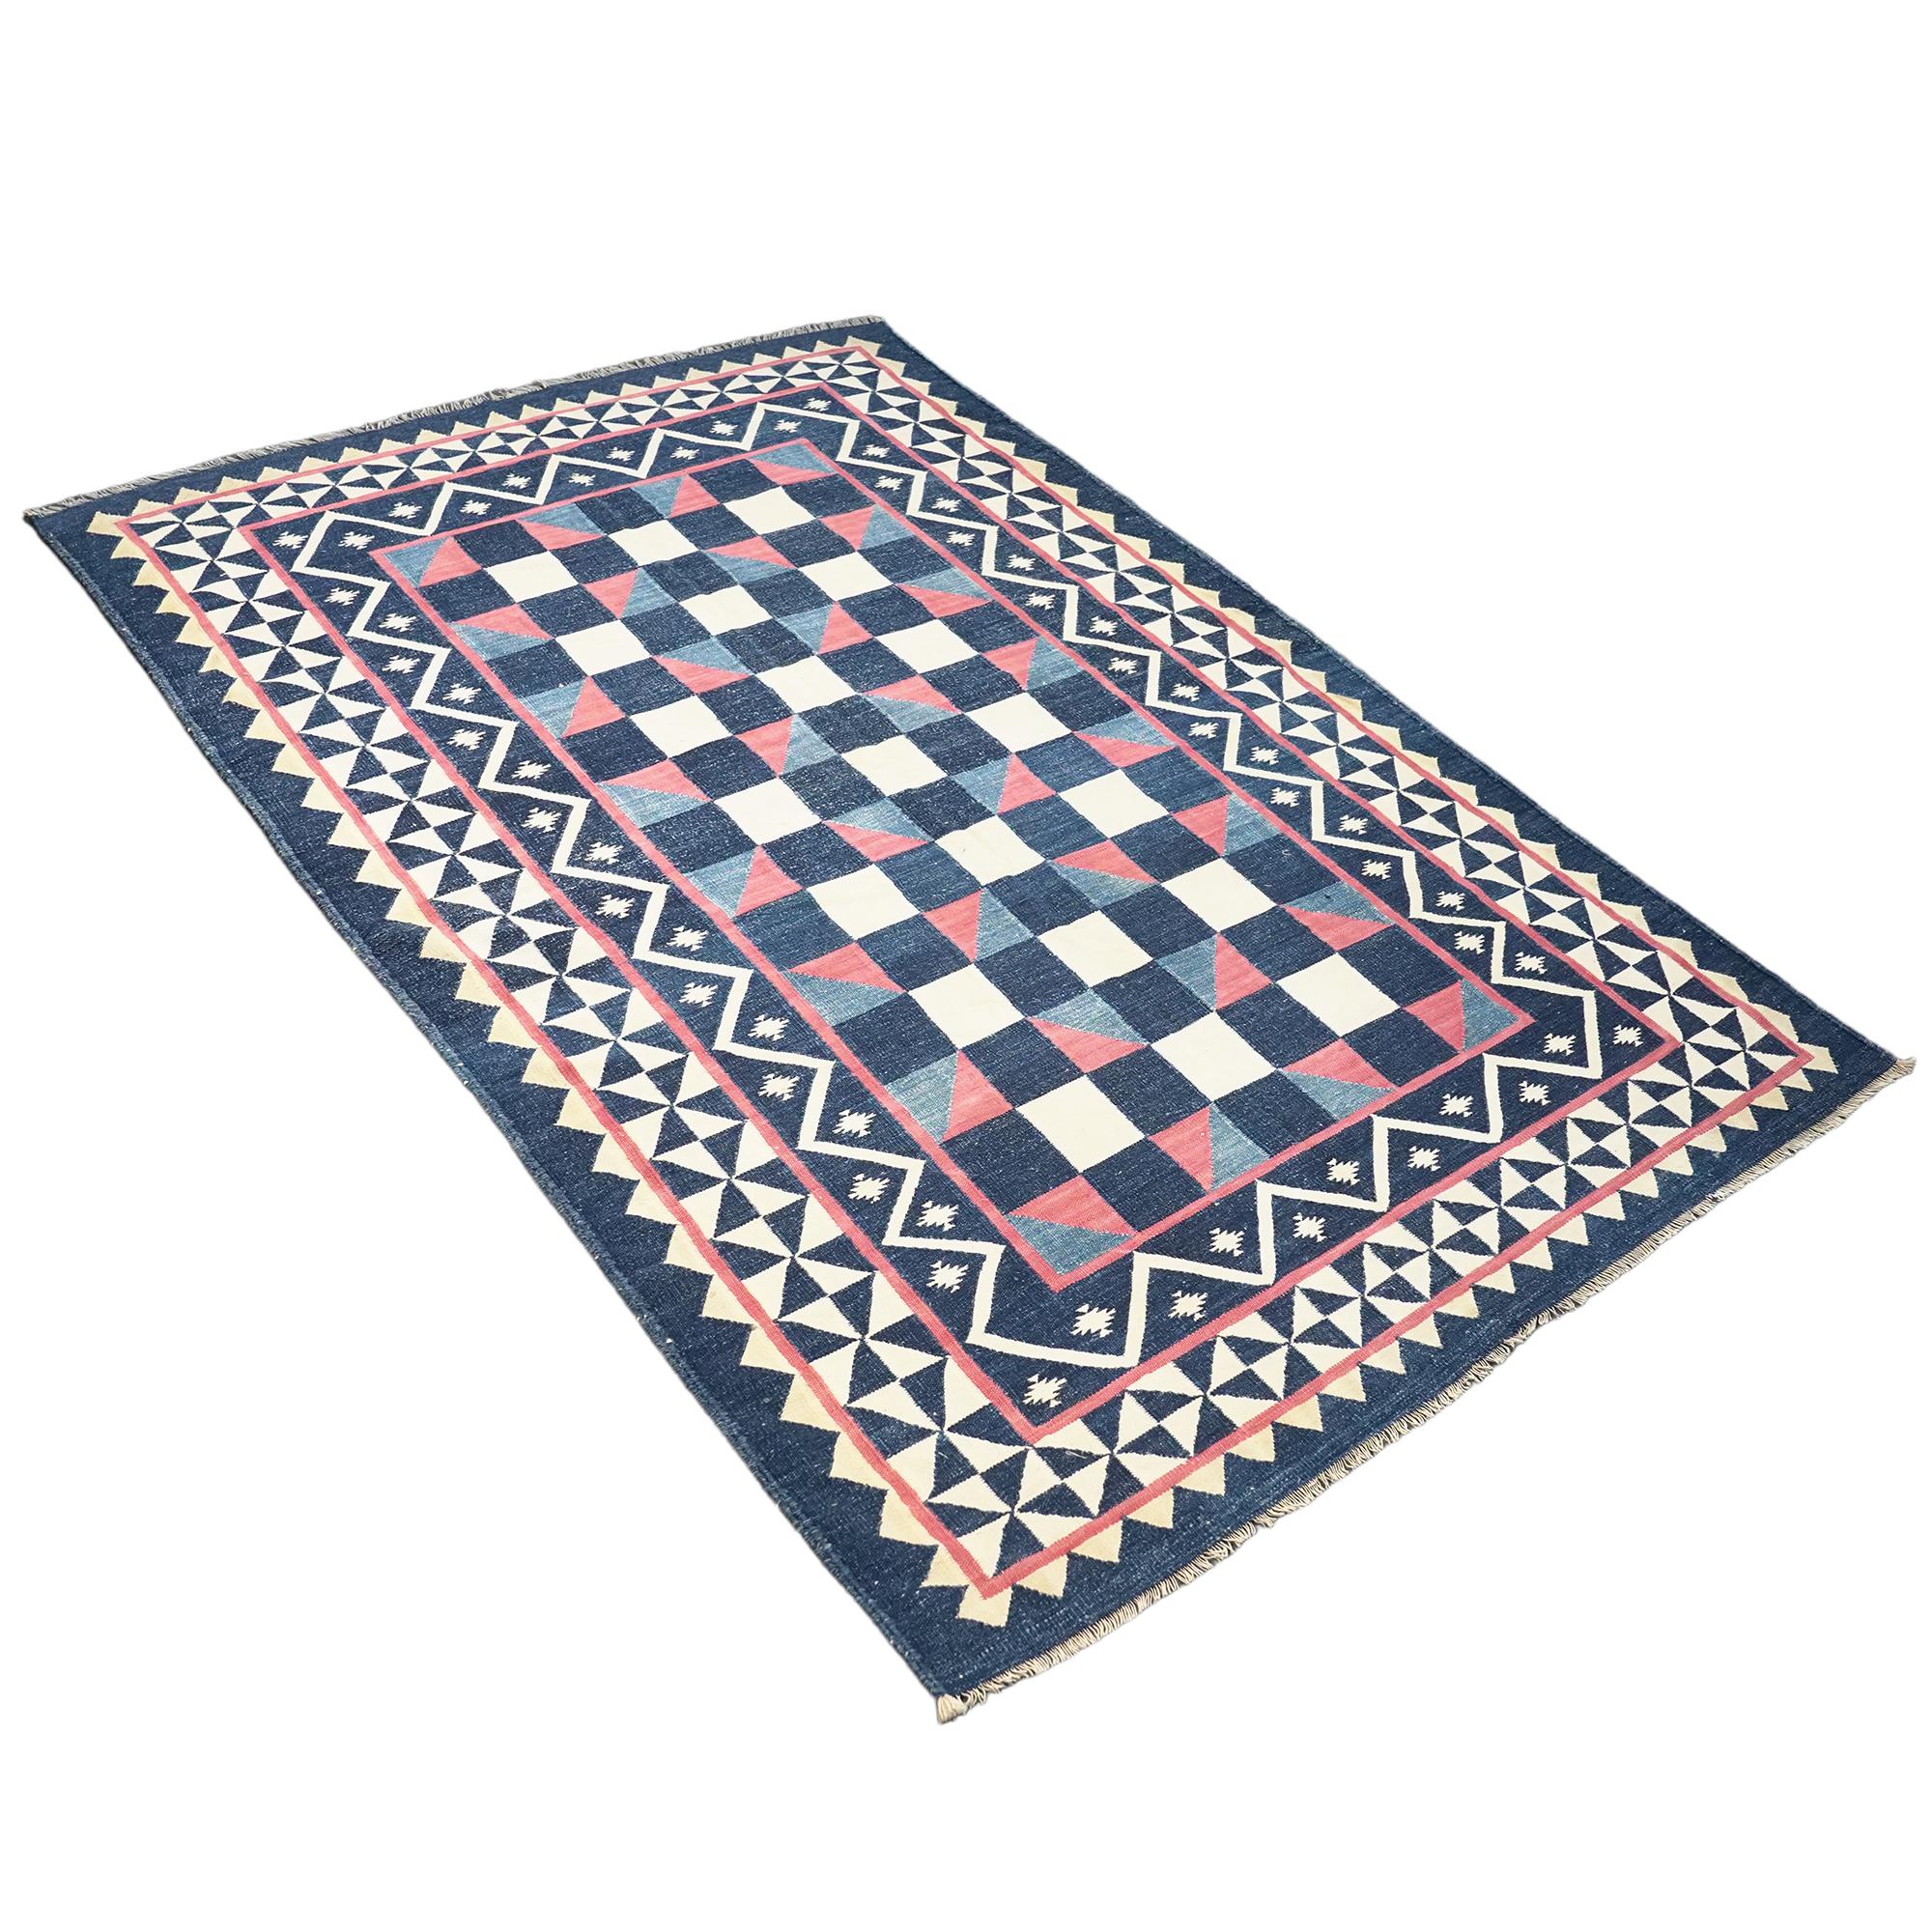 This vintage 4x6 Dhurrie flat weave is an exciting new entry in Rug & Kilim’s esteemed collection. Handwoven in wool, it originates from India circa 1950-1960. 

On the Design: 

From Rug & Kilim’s exclusive collection of vintage flatweaves, a